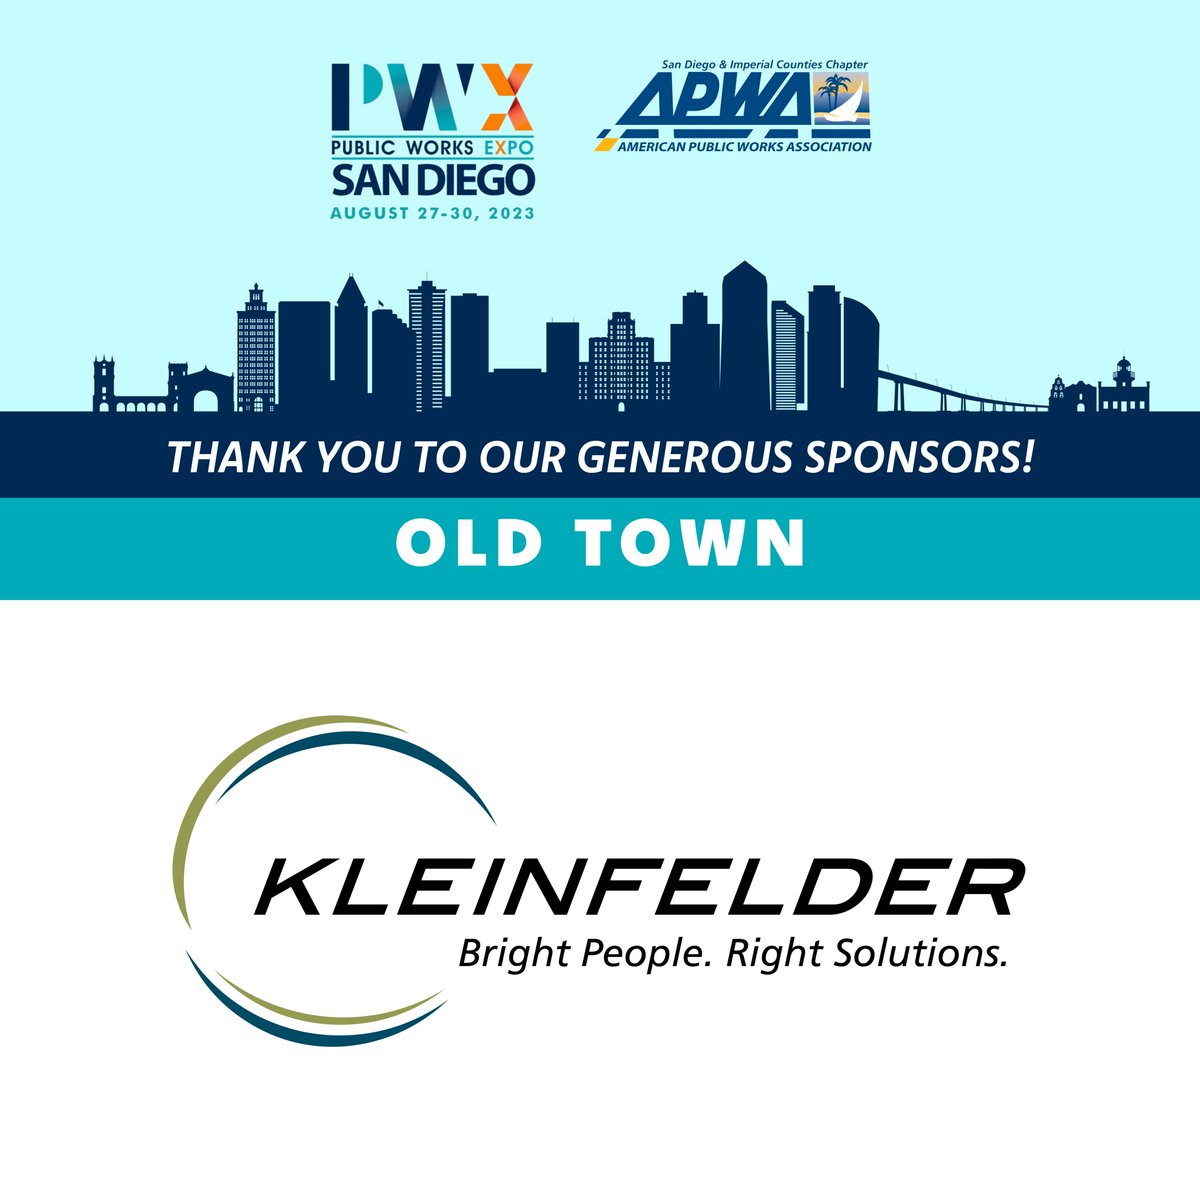 Since 1961, @KleinfelderHQ has transformed ideas and visions into award-winning projects🚊! As a leader, we are honored to have #WeAreKleinfelder as a sponsor of the American Public Works Association's #PWX2023! 🙌🙌🙌
#engineering #design #construction #publicrelations #EXPO